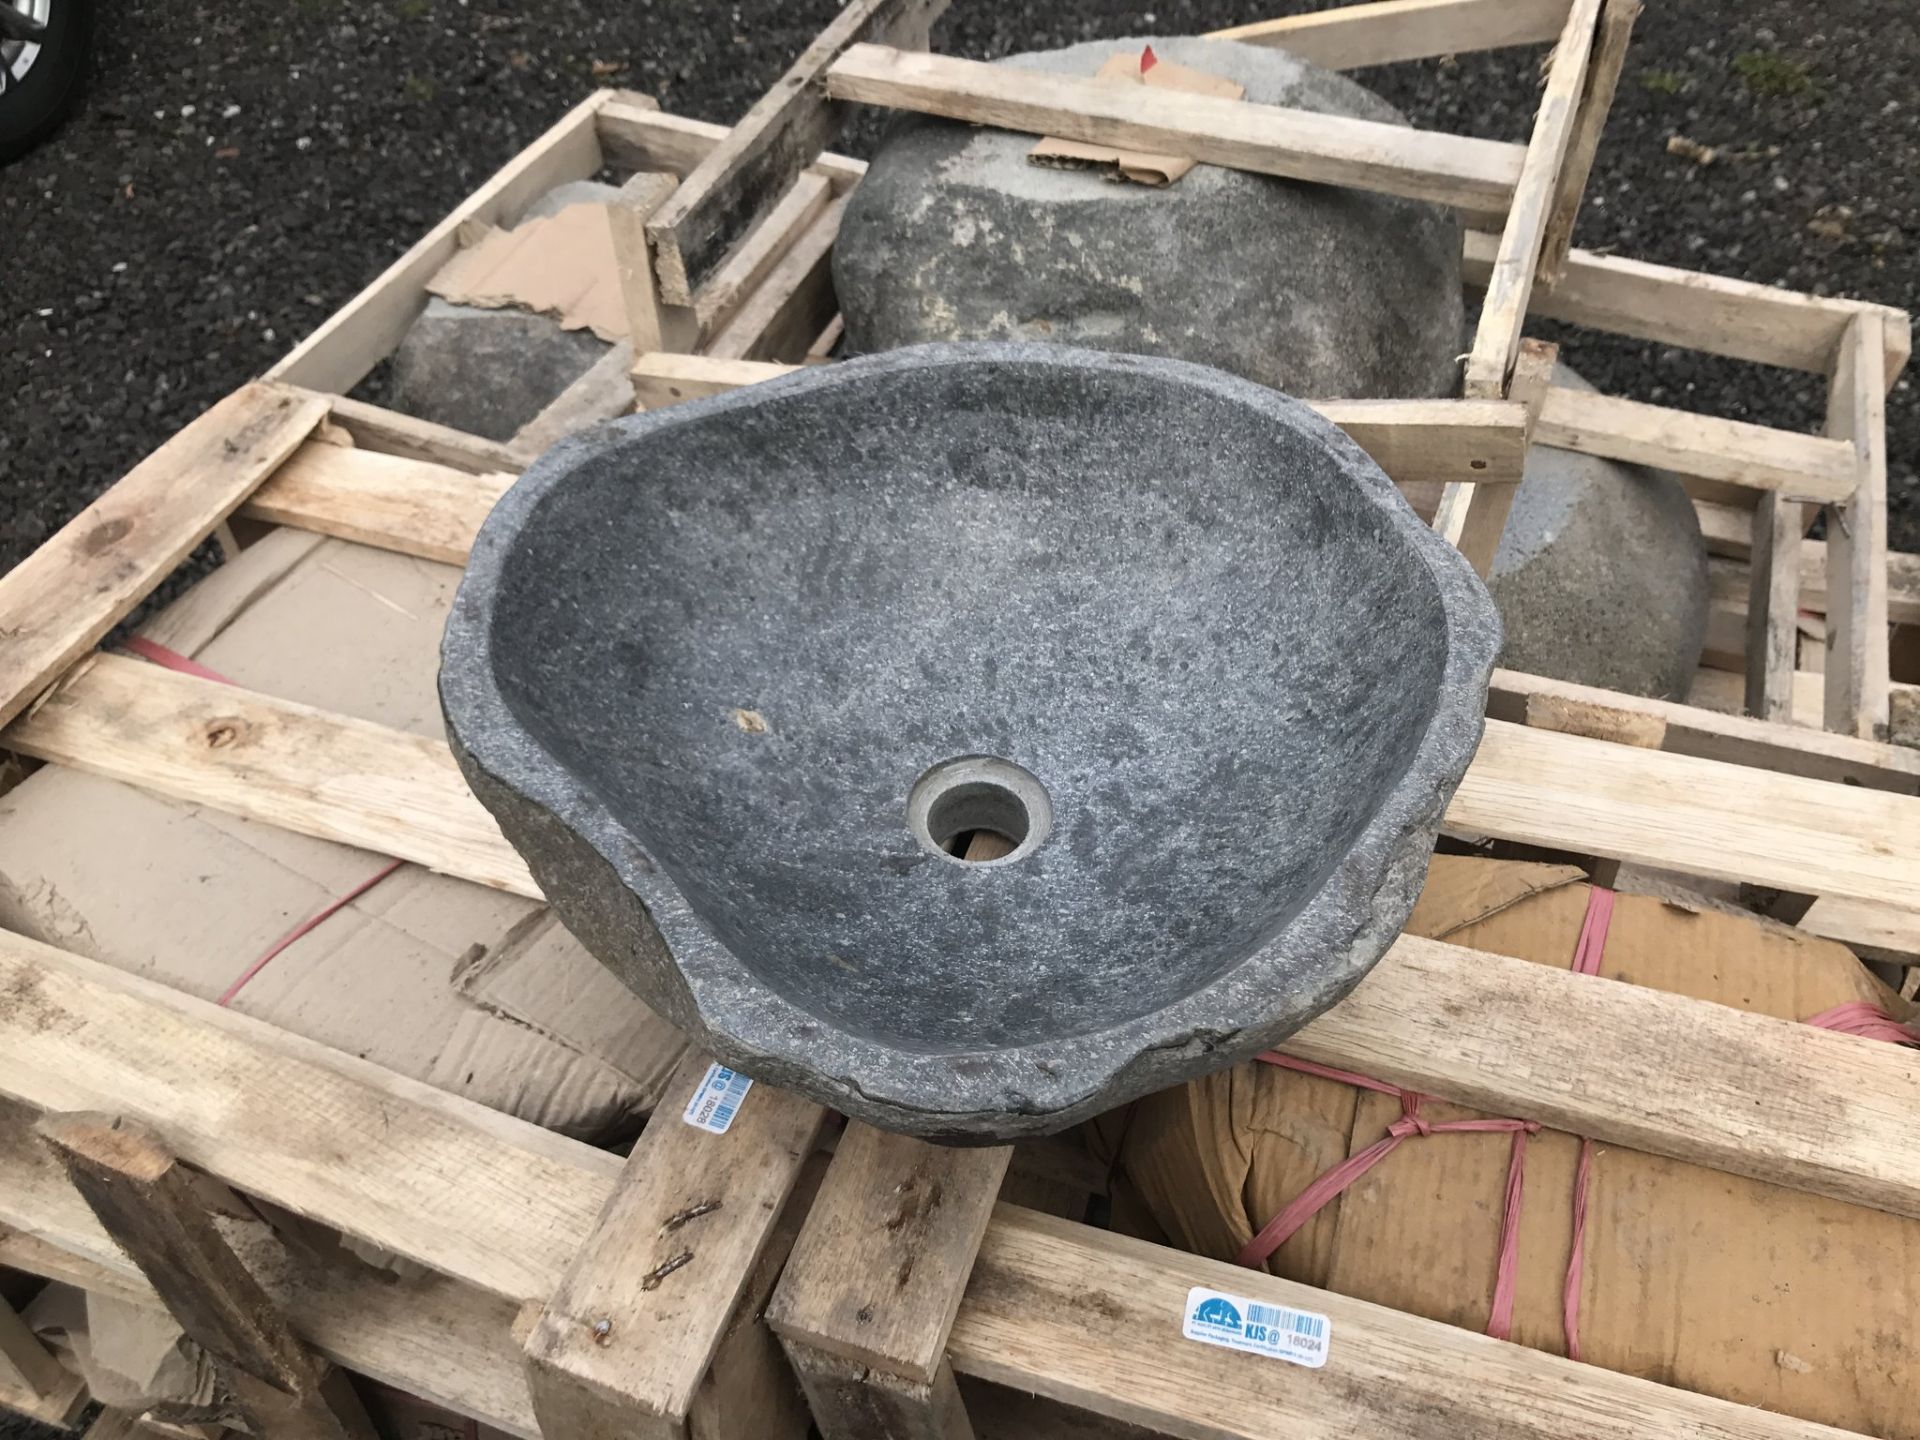 Heavy Original Carved And Polished Basalt Riverstone Sink Approx 40-50cm